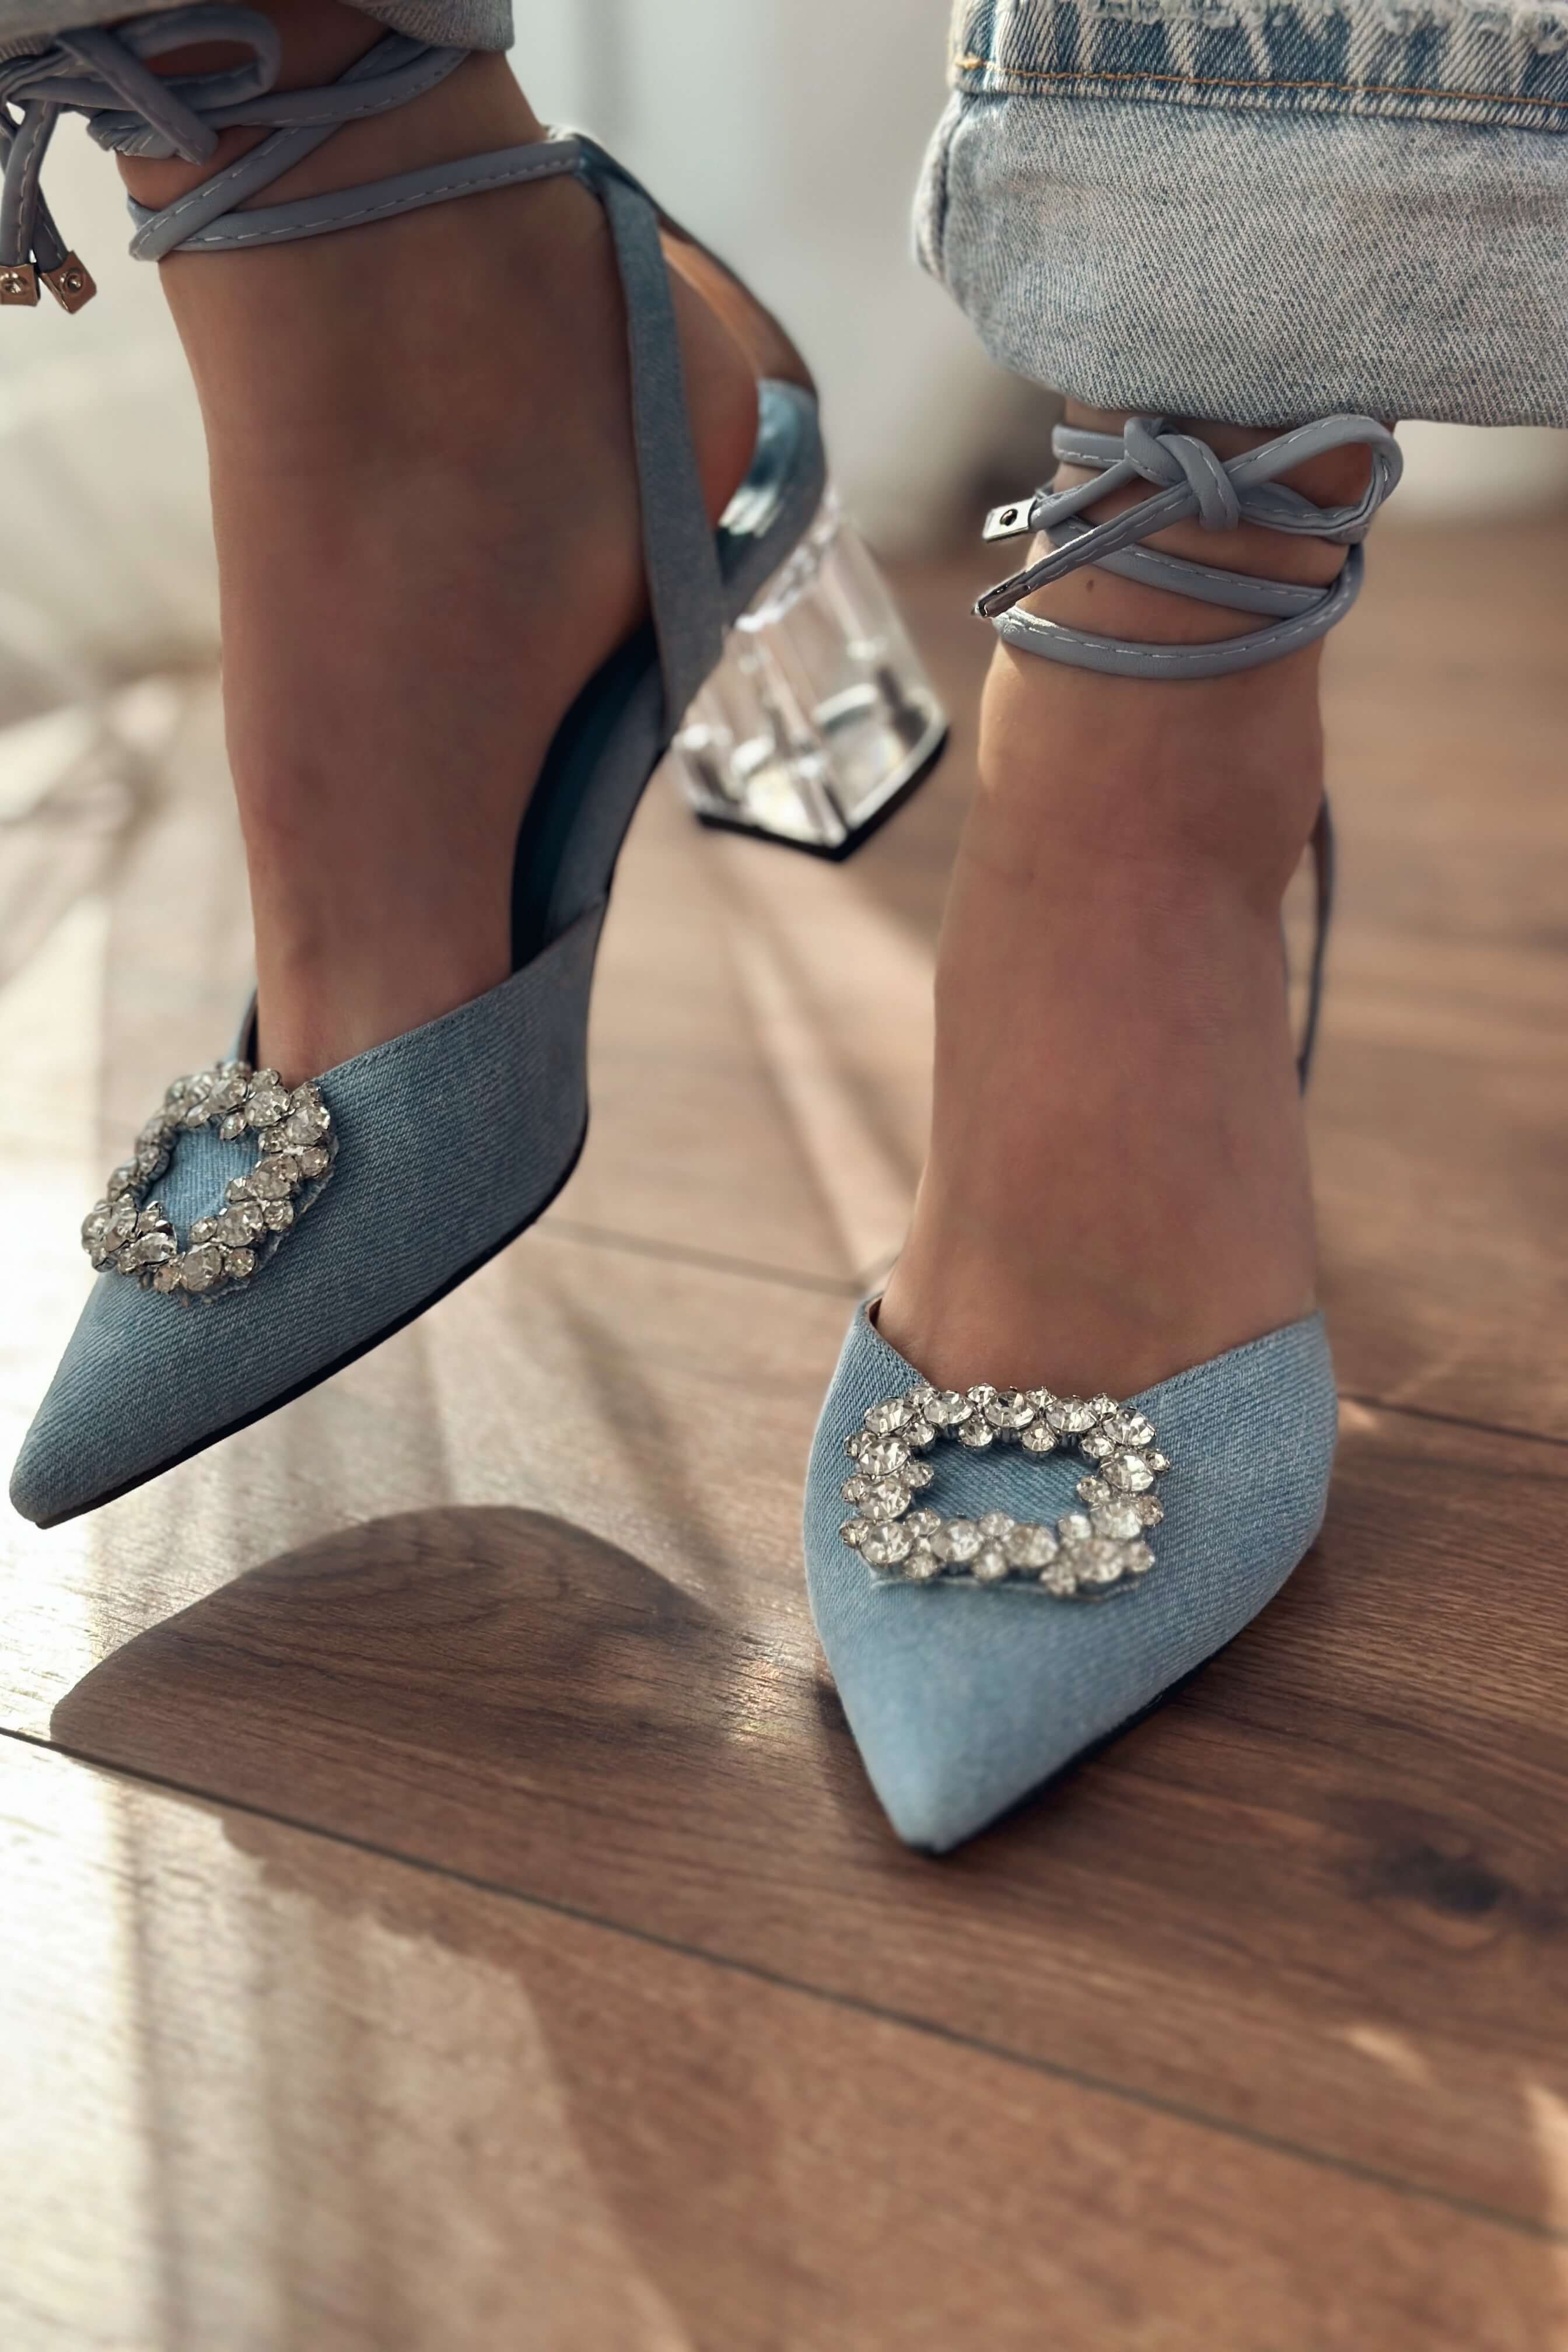 Peria jeans stone detailed woman short heeled stiletto baby blue